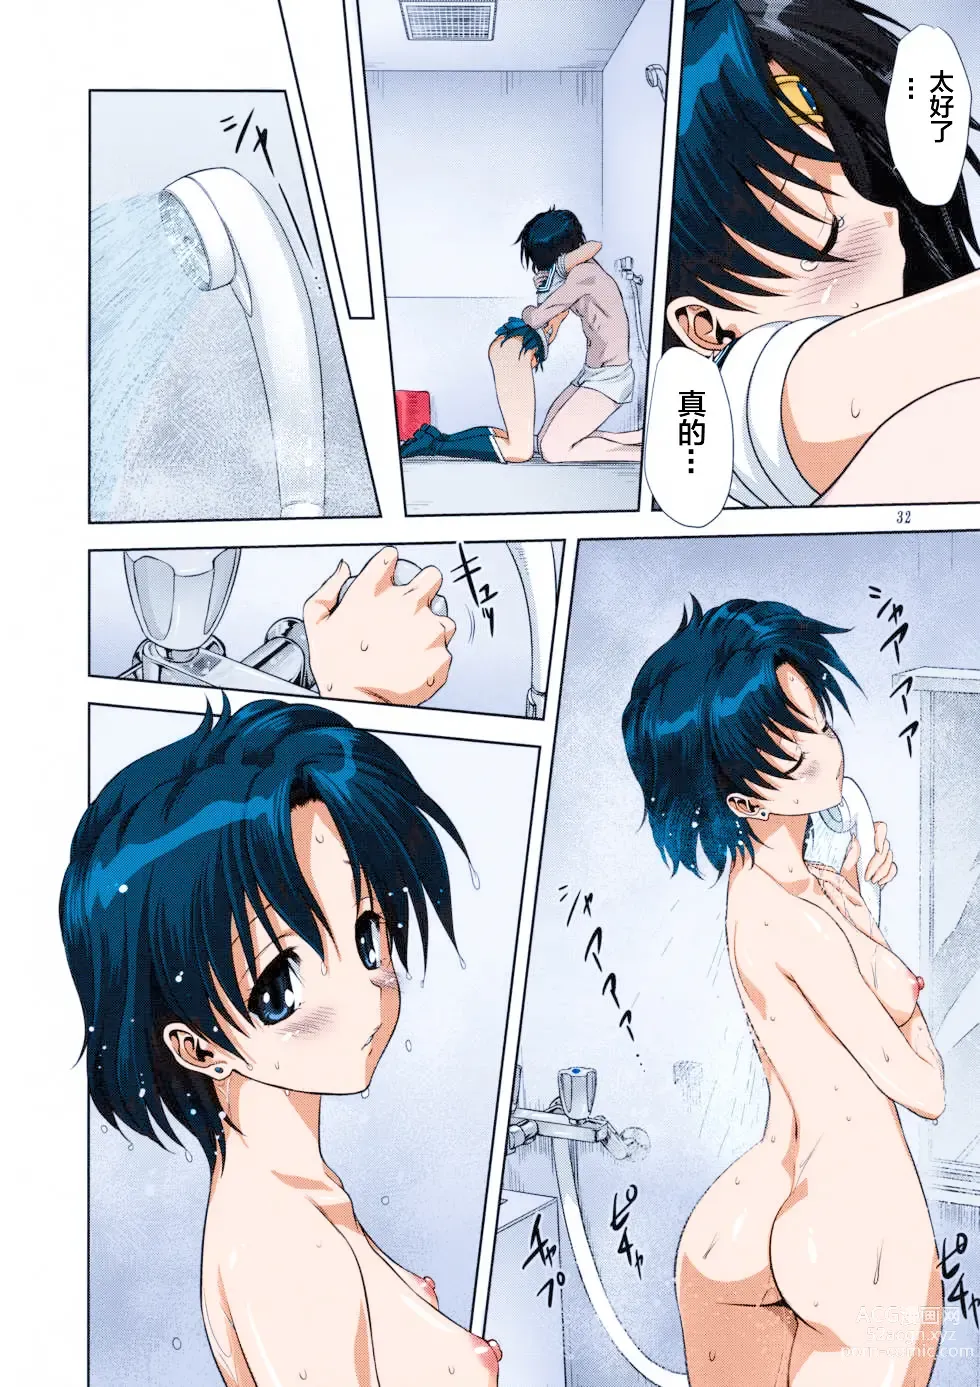 Page 33 of doujinshi Ami-chan to Issho (decensored)